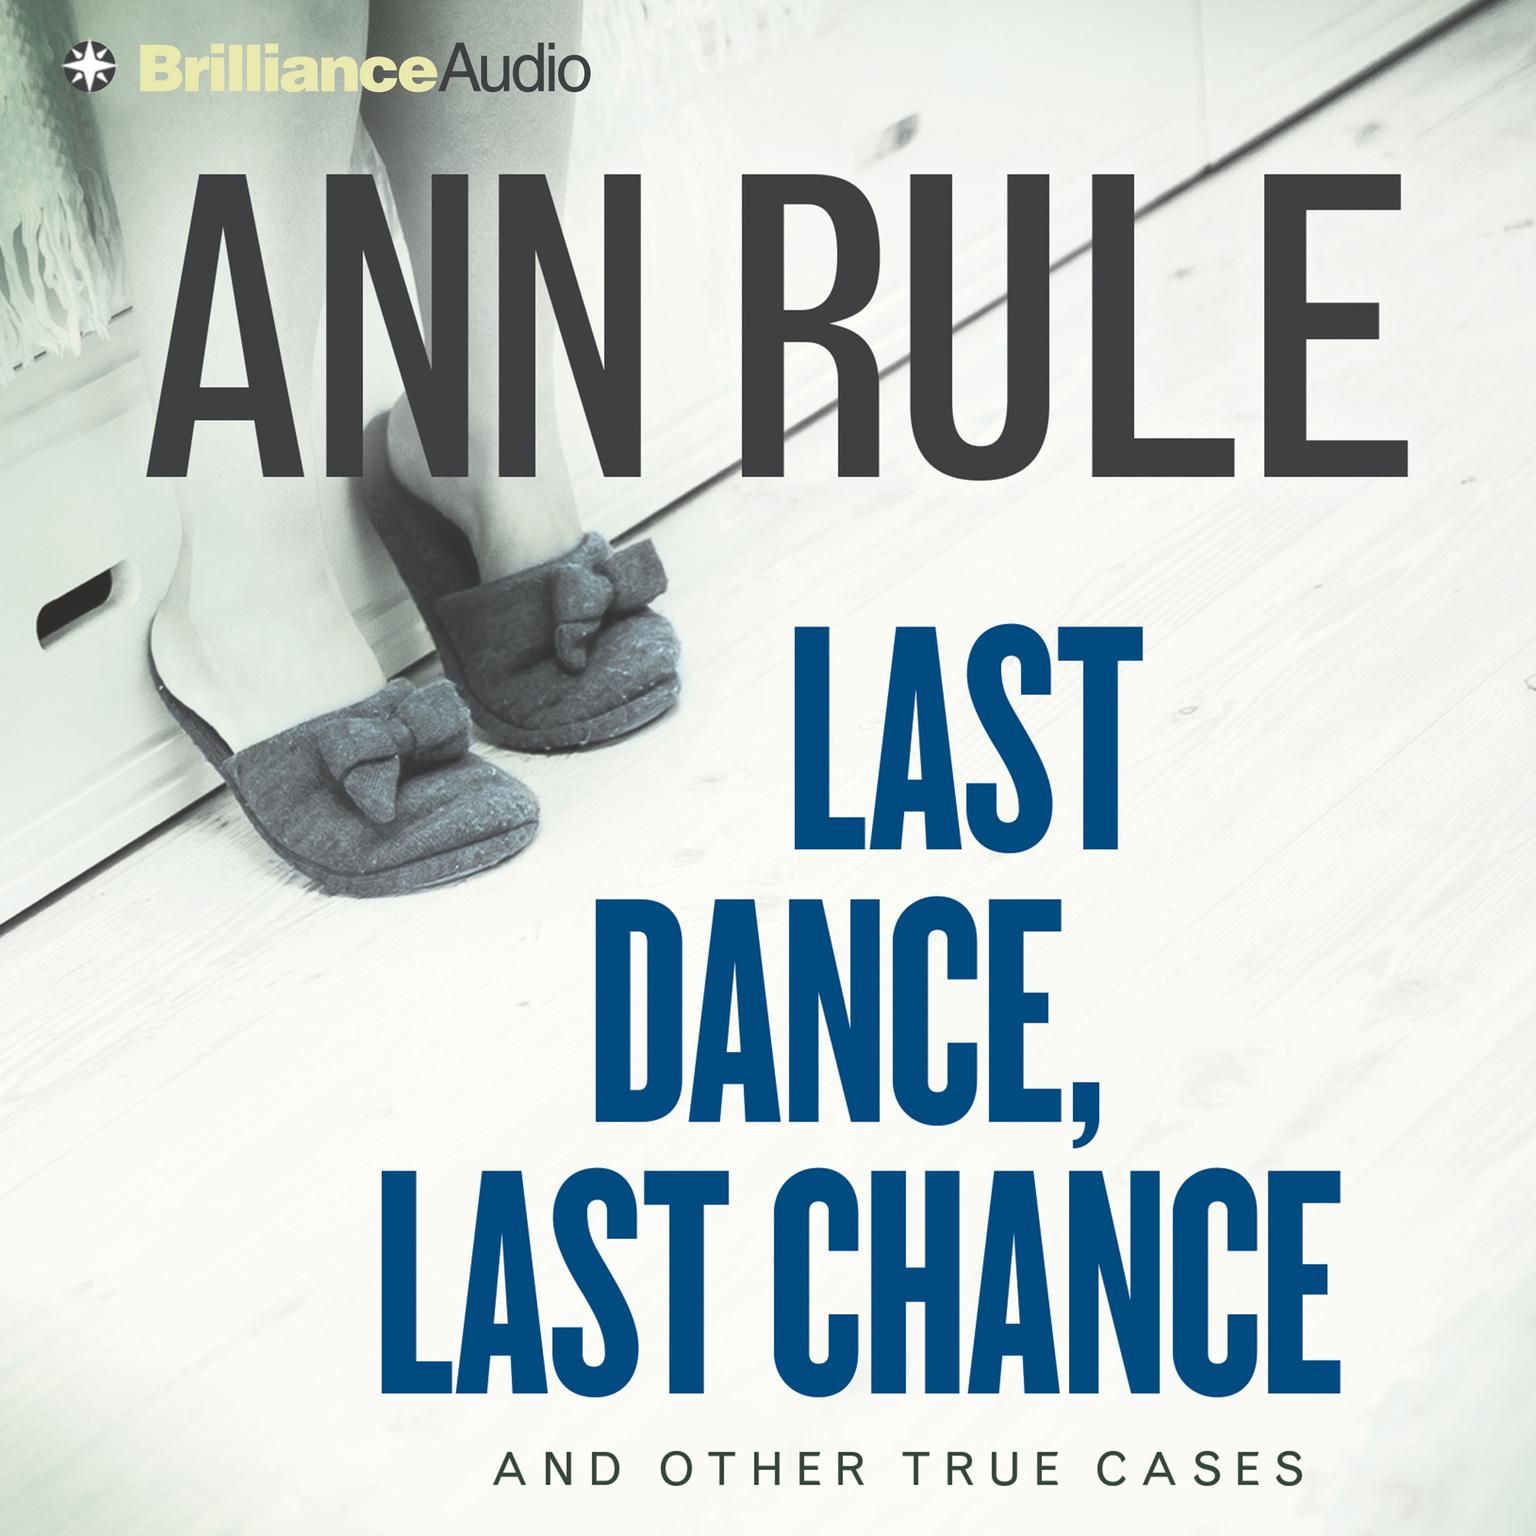 Last Dance, Last Chance (Abridged): And Other True Cases Audiobook, by Ann Rule